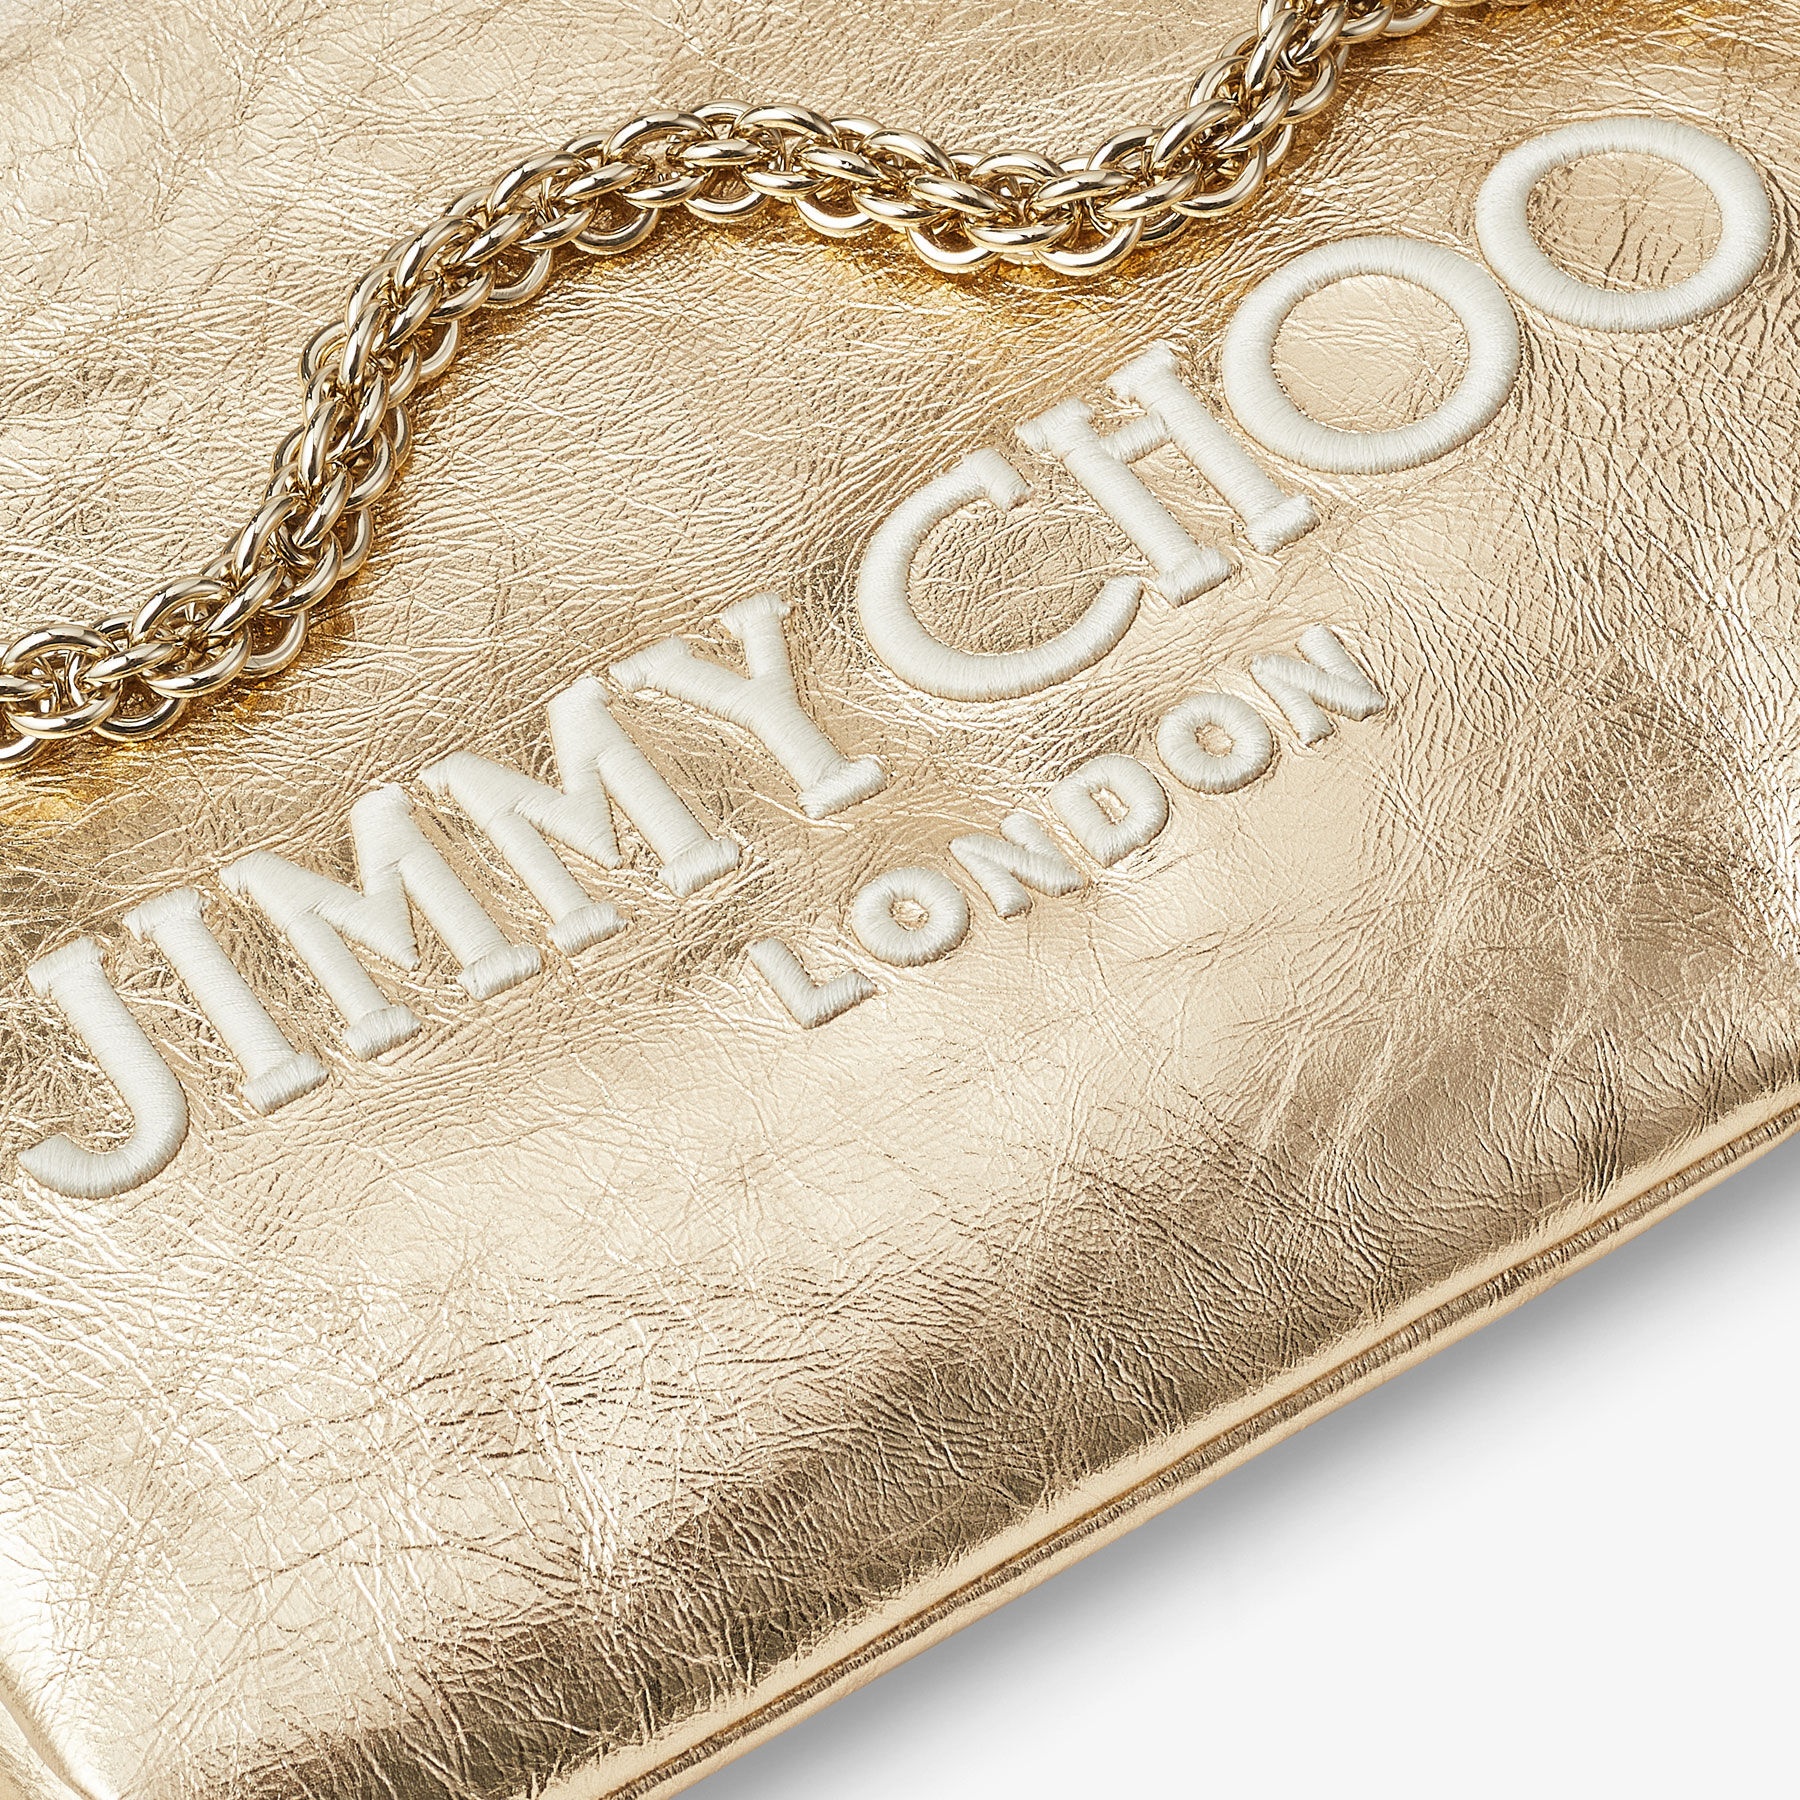 Callie Shoulder
Gold Metallic Nappa Shoulder Bag with Jimmy Choo Embroidery - 3